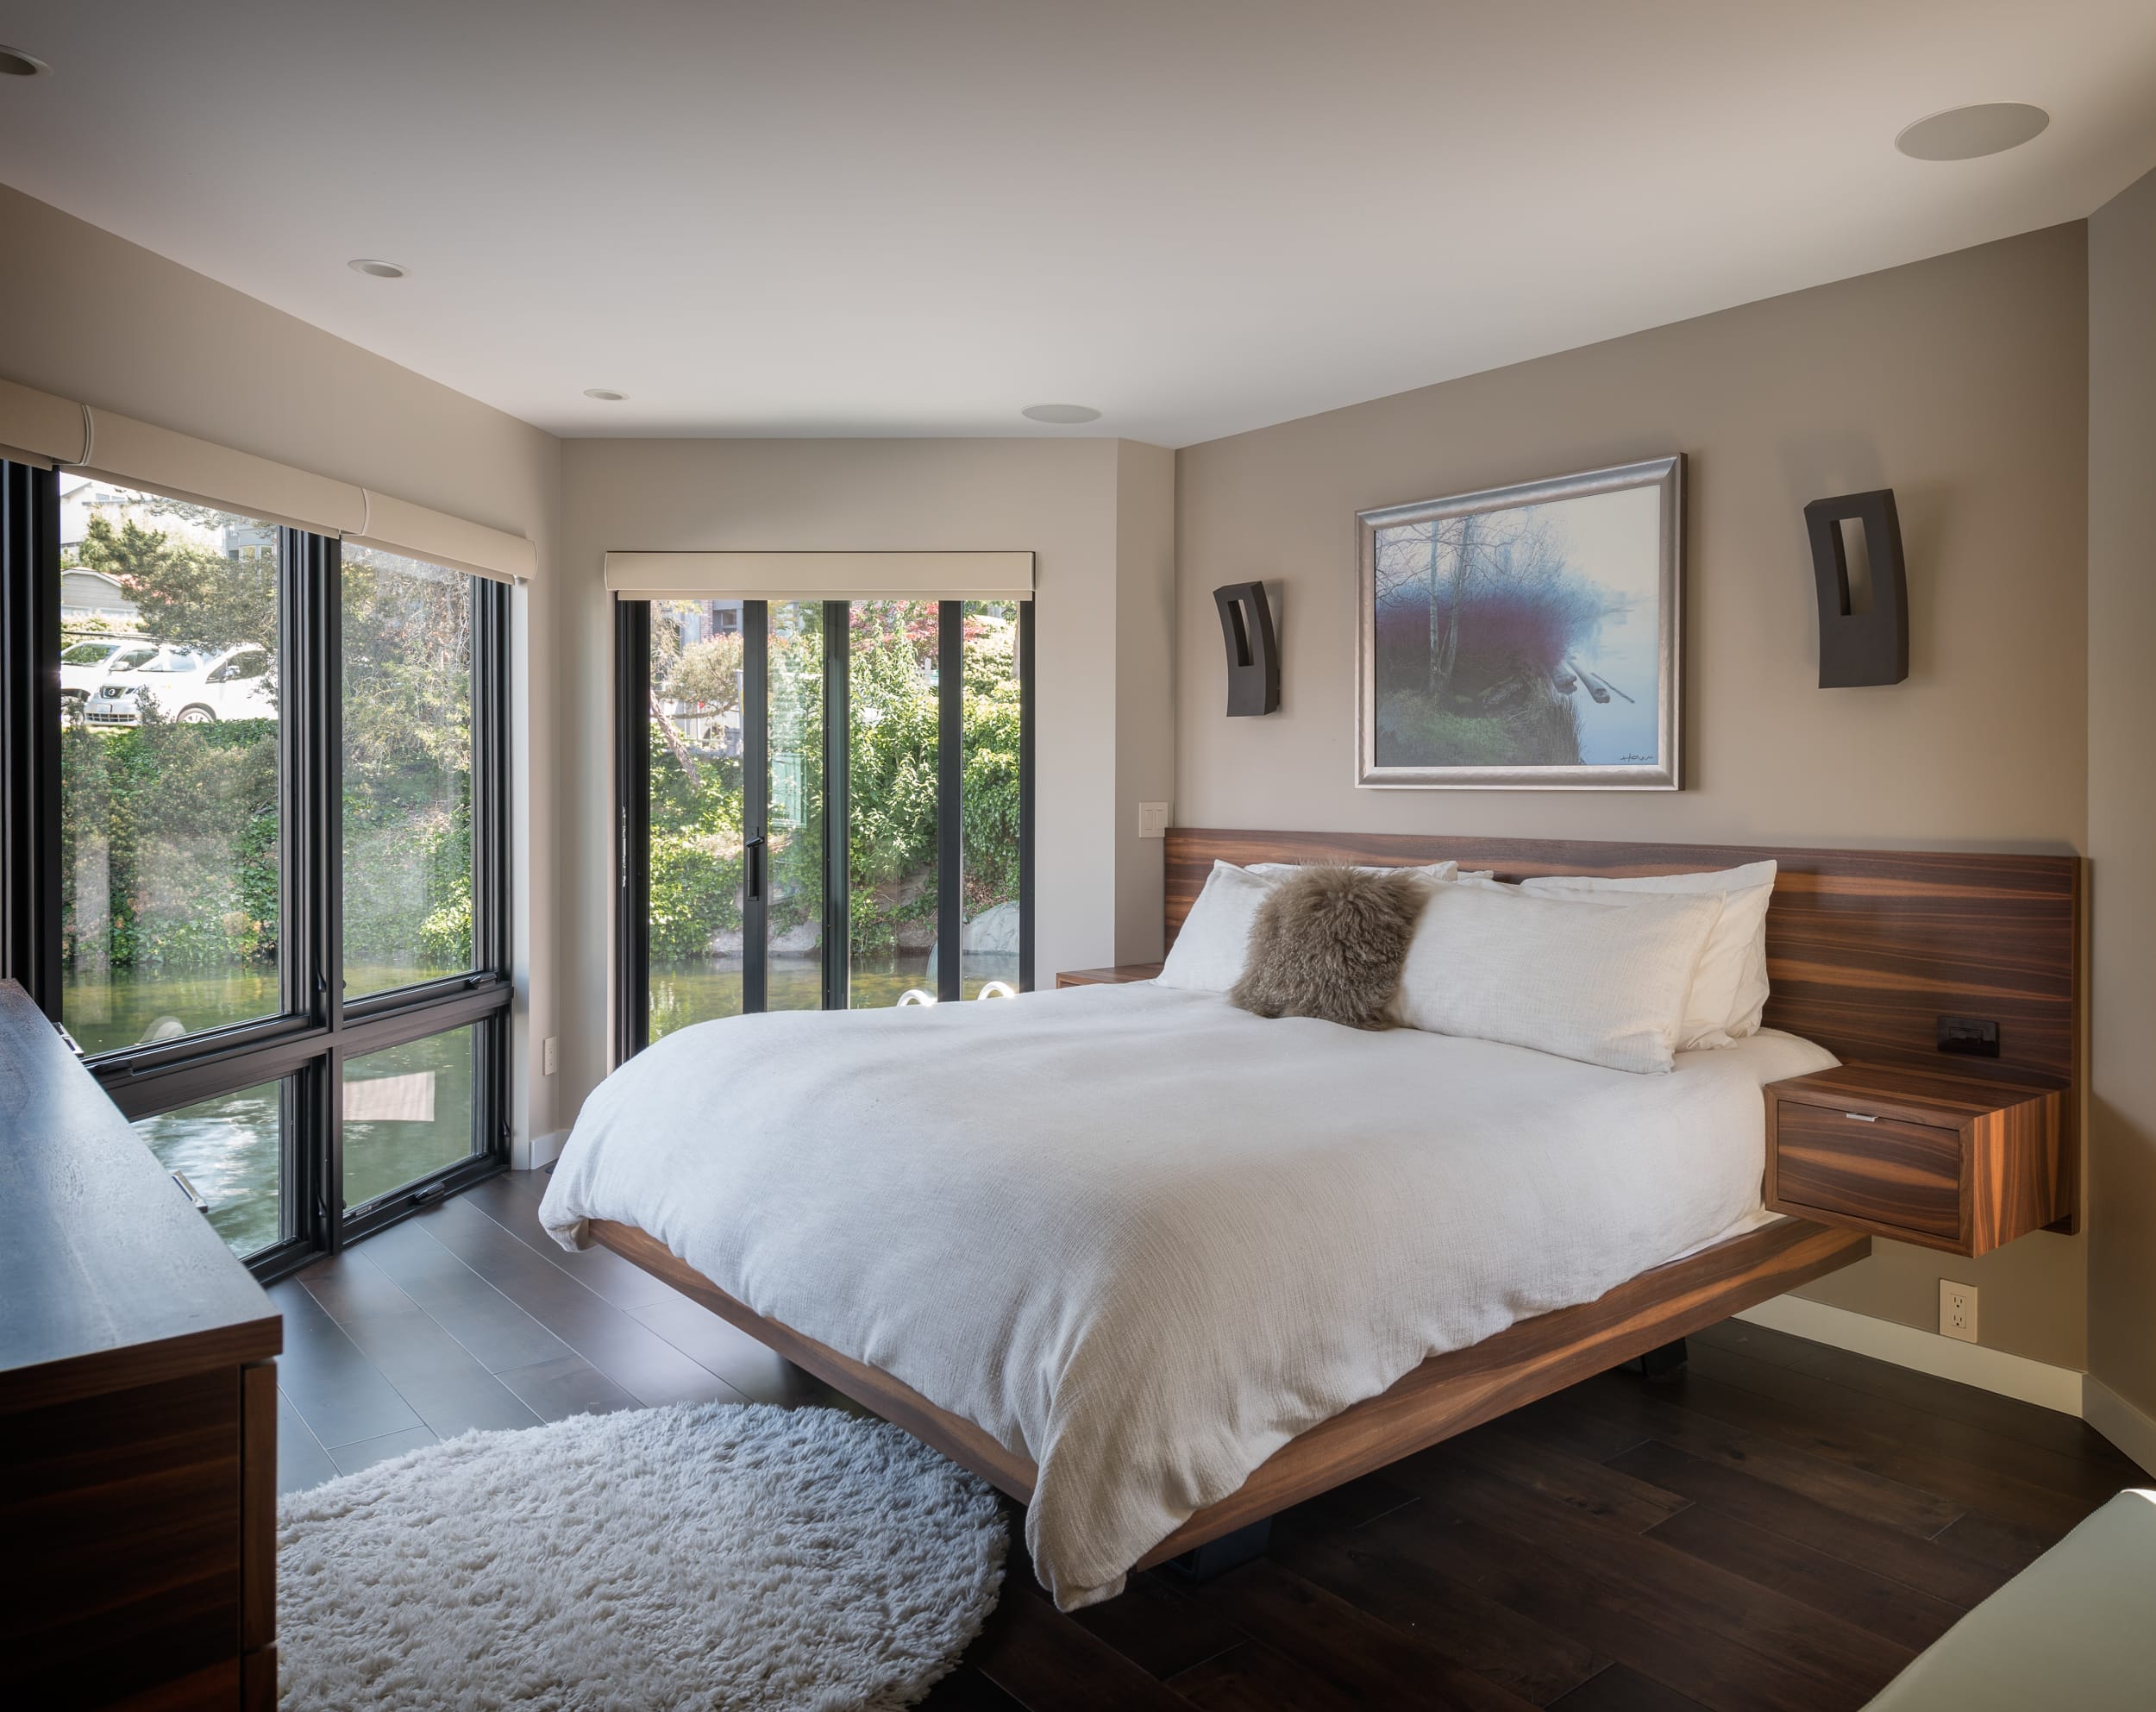 A modern bed in a bedroom of a home building.